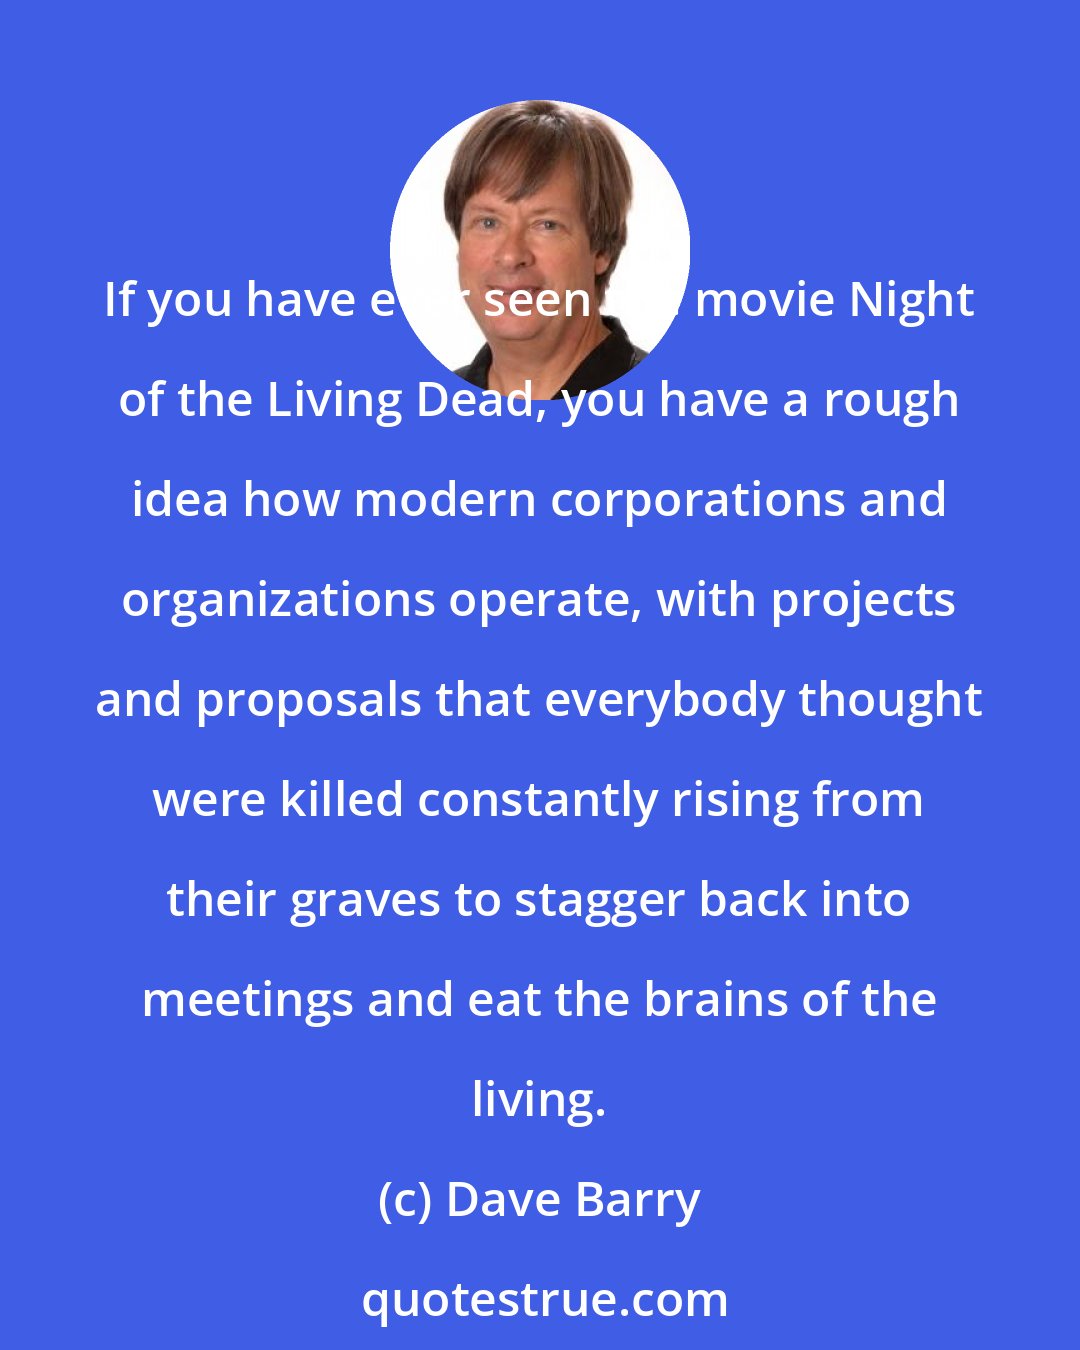 Dave Barry: If you have ever seen the movie Night of the Living Dead, you have a rough idea how modern corporations and organizations operate, with projects and proposals that everybody thought were killed constantly rising from their graves to stagger back into meetings and eat the brains of the living.